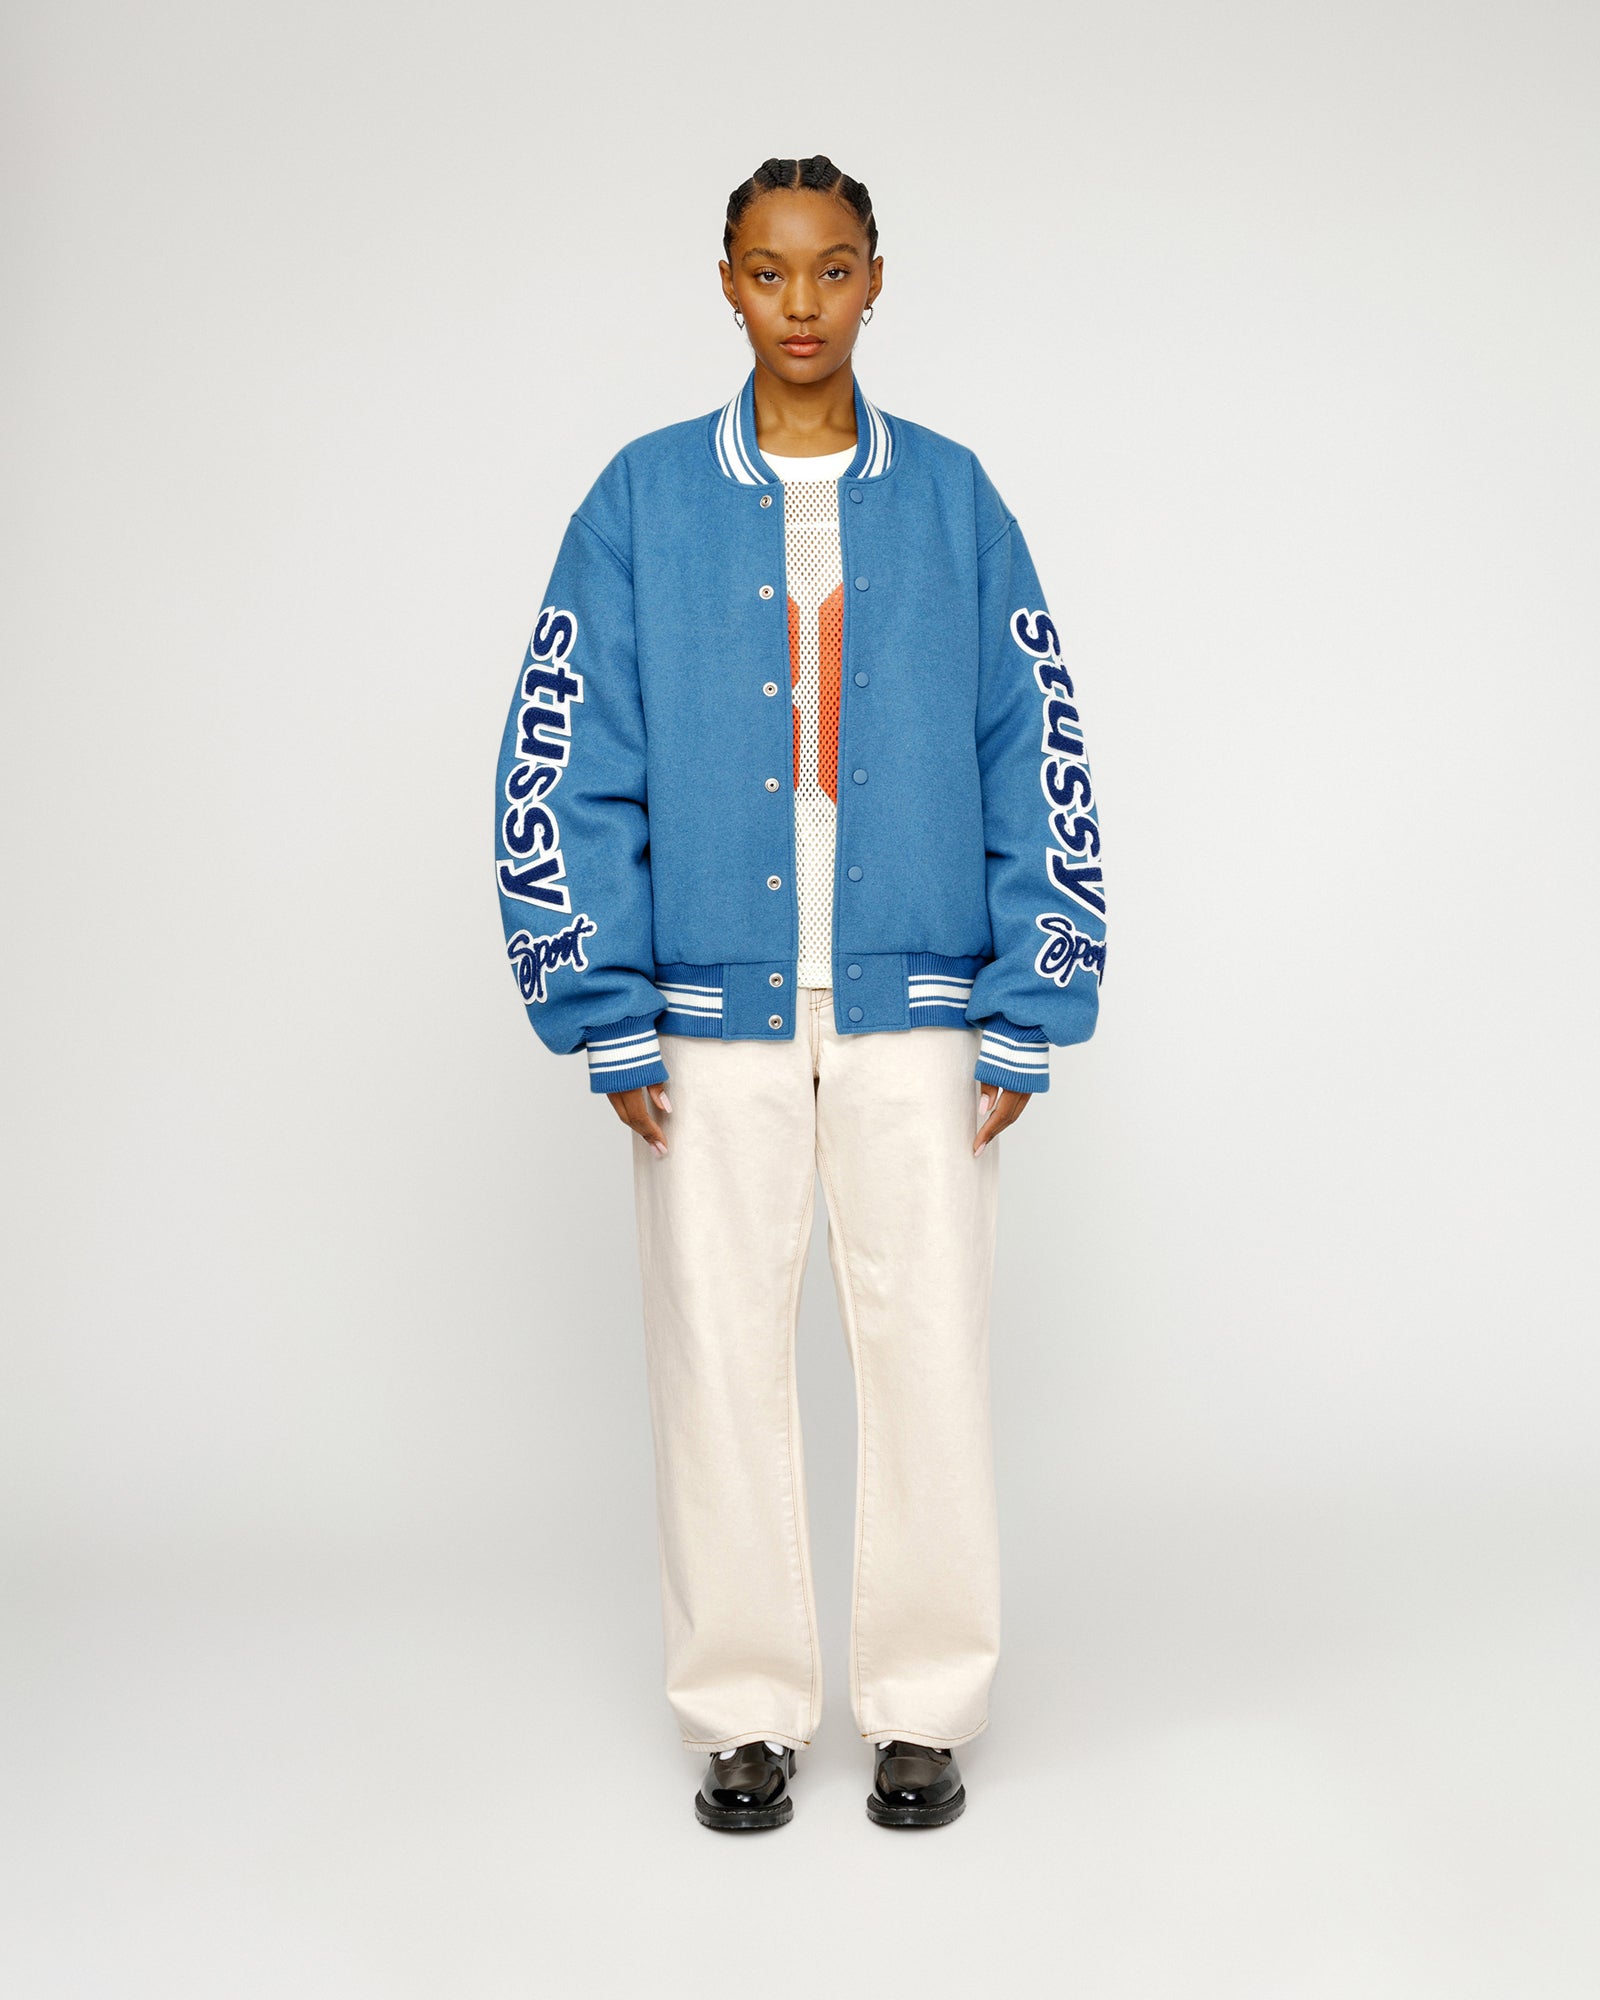 VARSITY JACKET COMPETITION BLUE OUTERWEAR